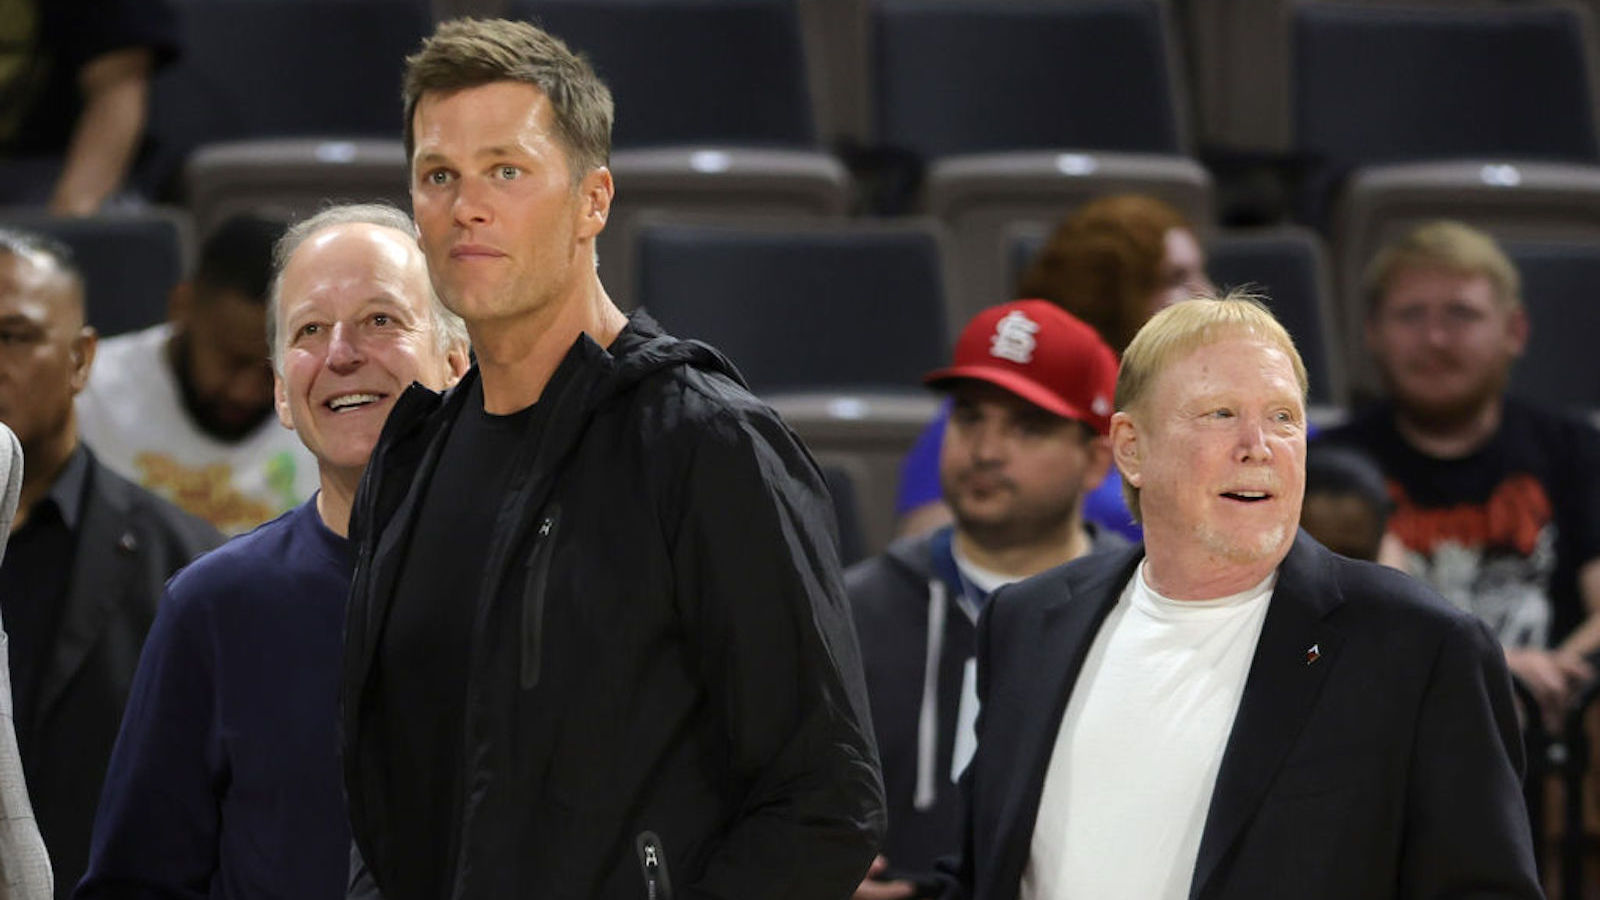 Sportscaster Jim Gray, Tampa Bay Buccaneers quarterback Tom Brady and Las Vegas Raiders owner and managing general partner and Las Vegas Aces owner Mark Davis watch players warm up during halftime of a game between the Connecticut Sun and the Aces